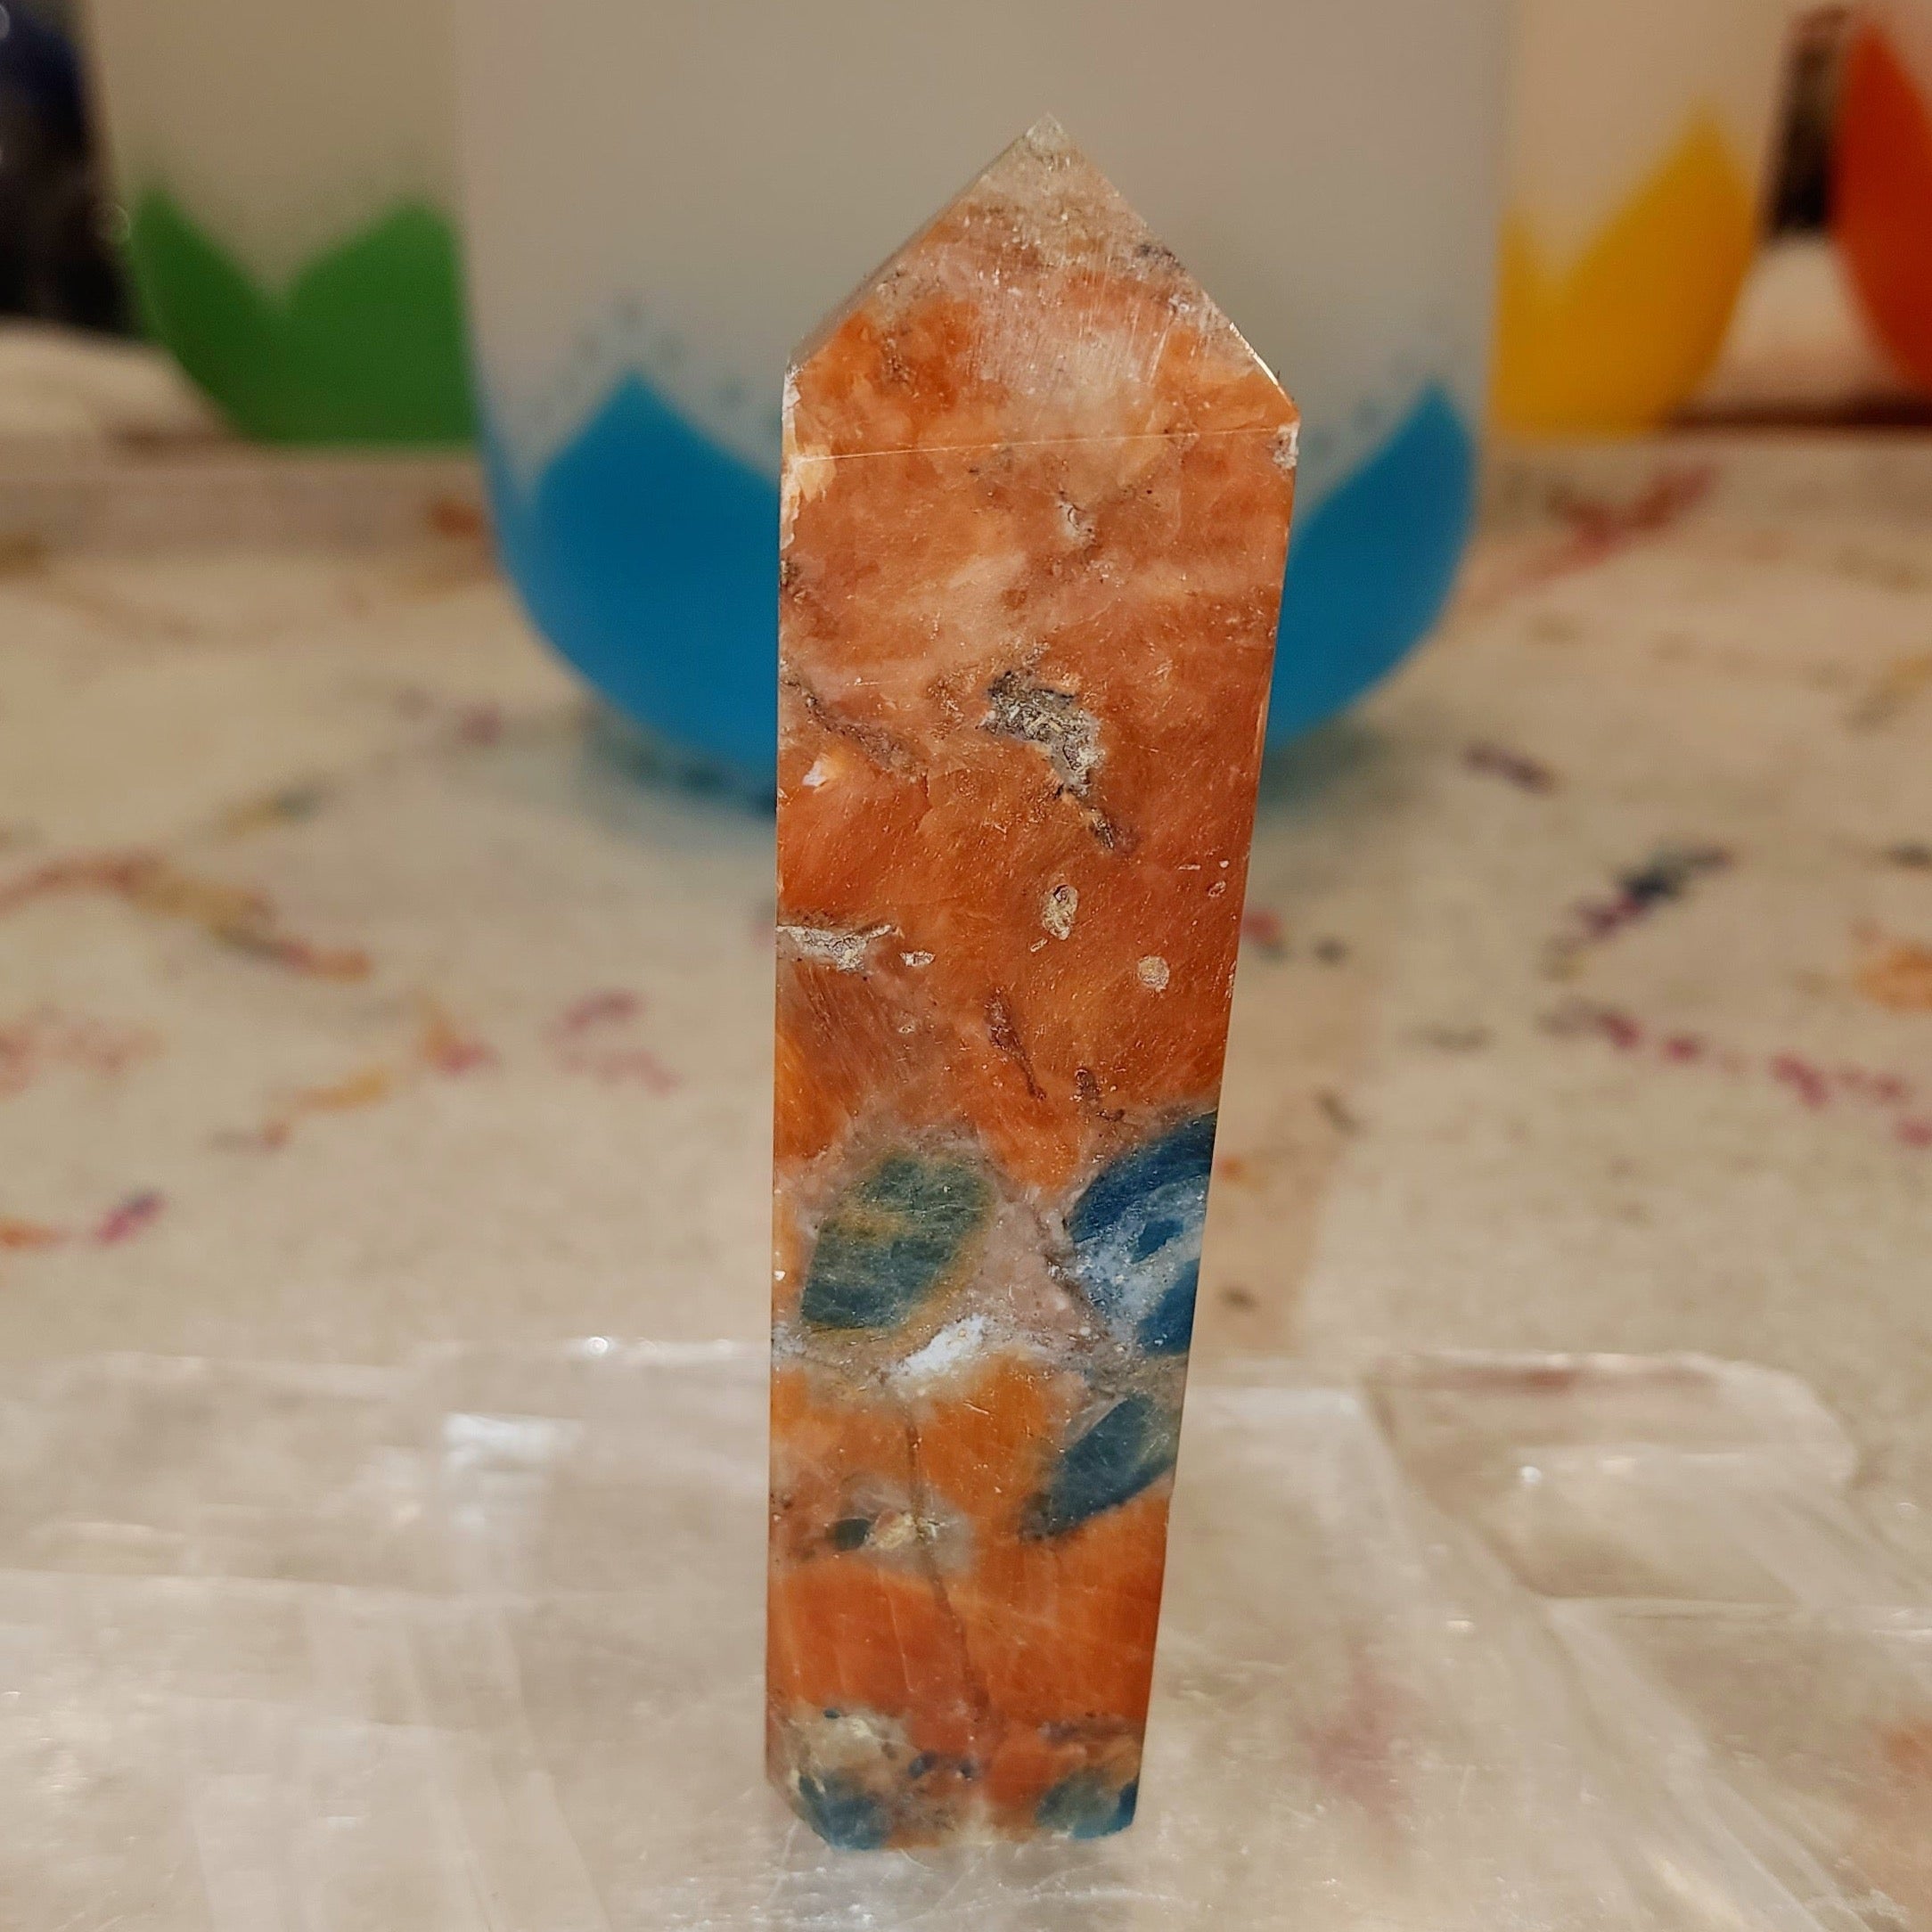 Blue Apatite with Orange Calcite Obelisk for Improved Energy, Intuition and Optimum Health